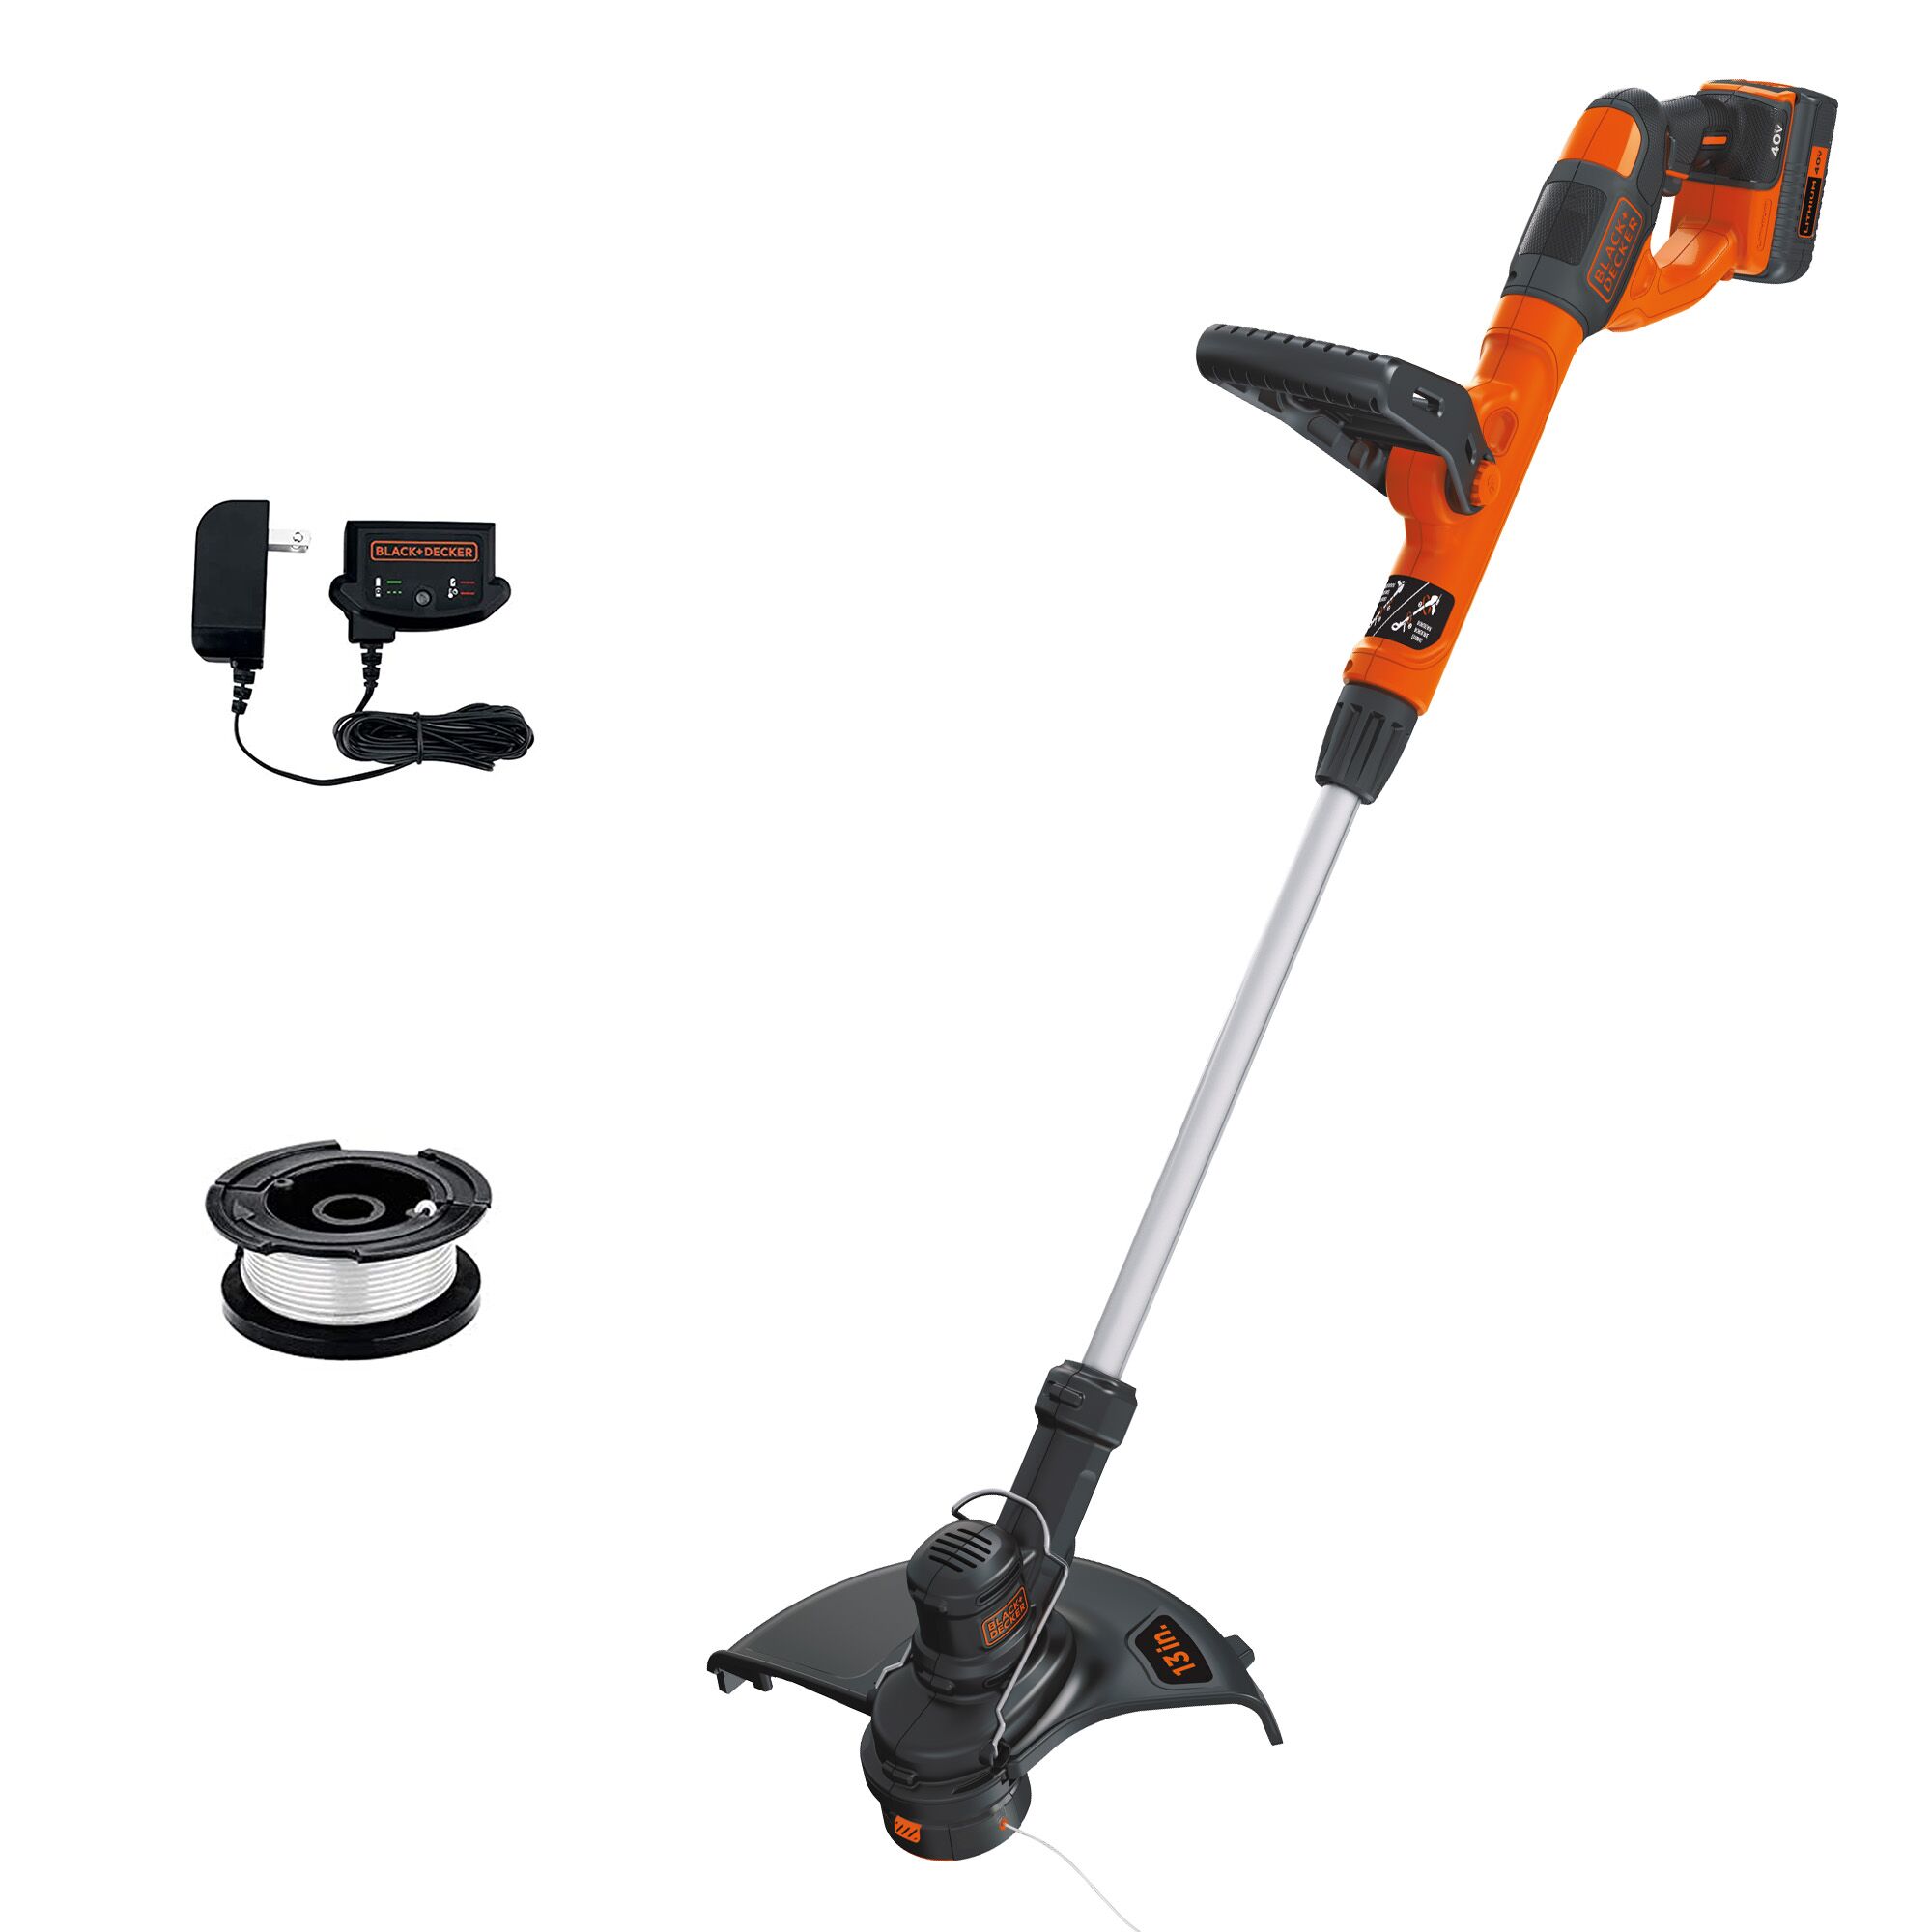 40V MAX* Cordless String Trimmer with charger and spool of string.